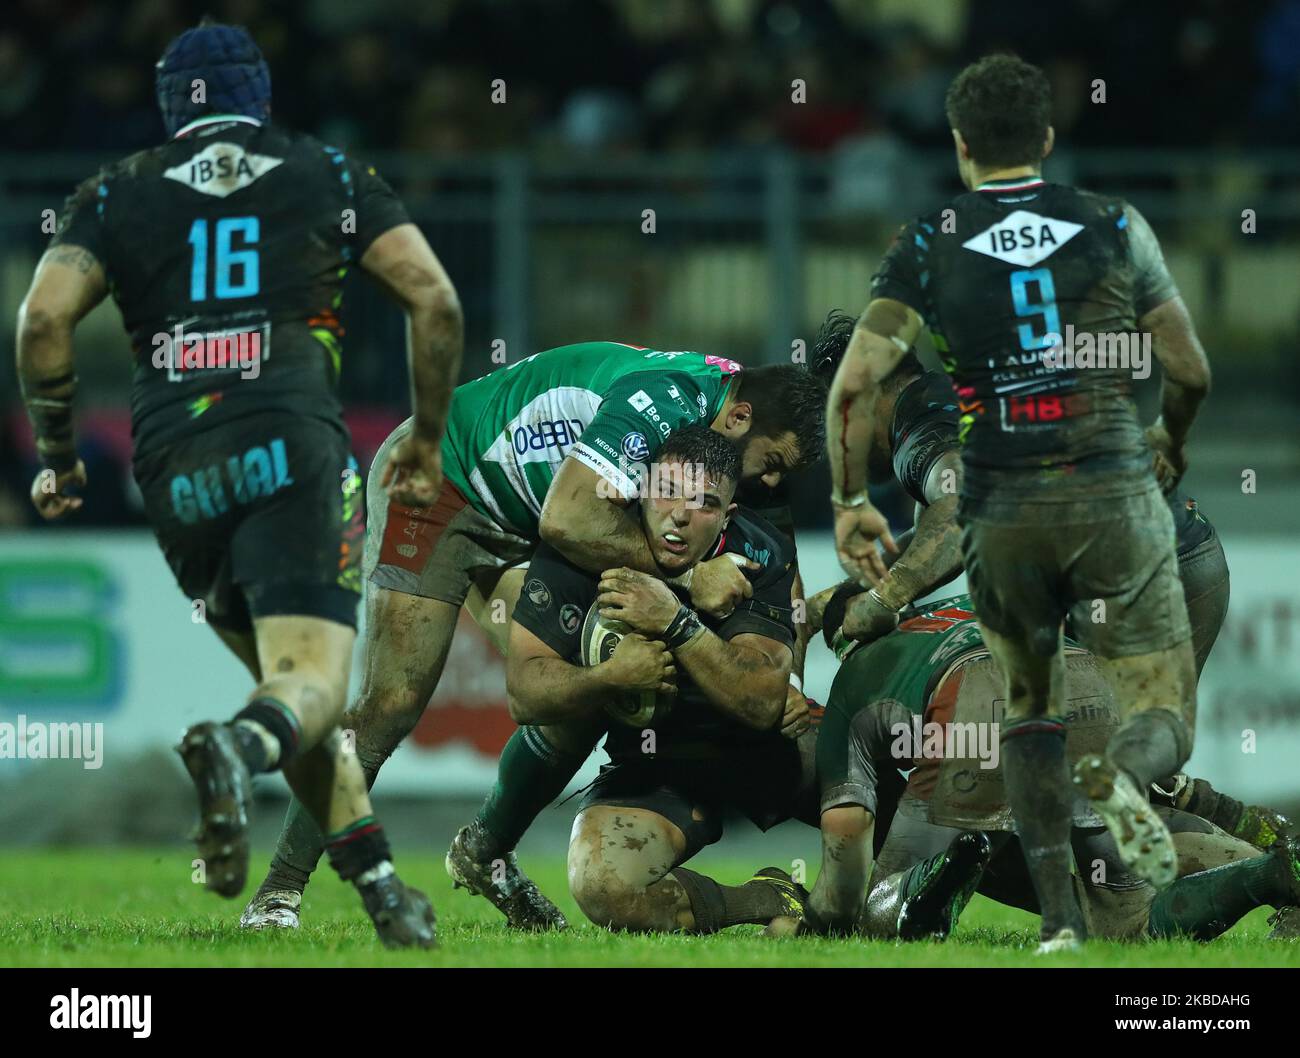 Danilo Fischetti of Zebre tackled by Nicola Quaglio of Benetton during the rugby Guinness Pro14 match Zebre Rugby Club v Benetton Treviso at the Lanfranchi Stadium in Parma, Italy on December 21, 2019 (Photo by Matteo Ciambelli/NurPhoto) Stock Photo